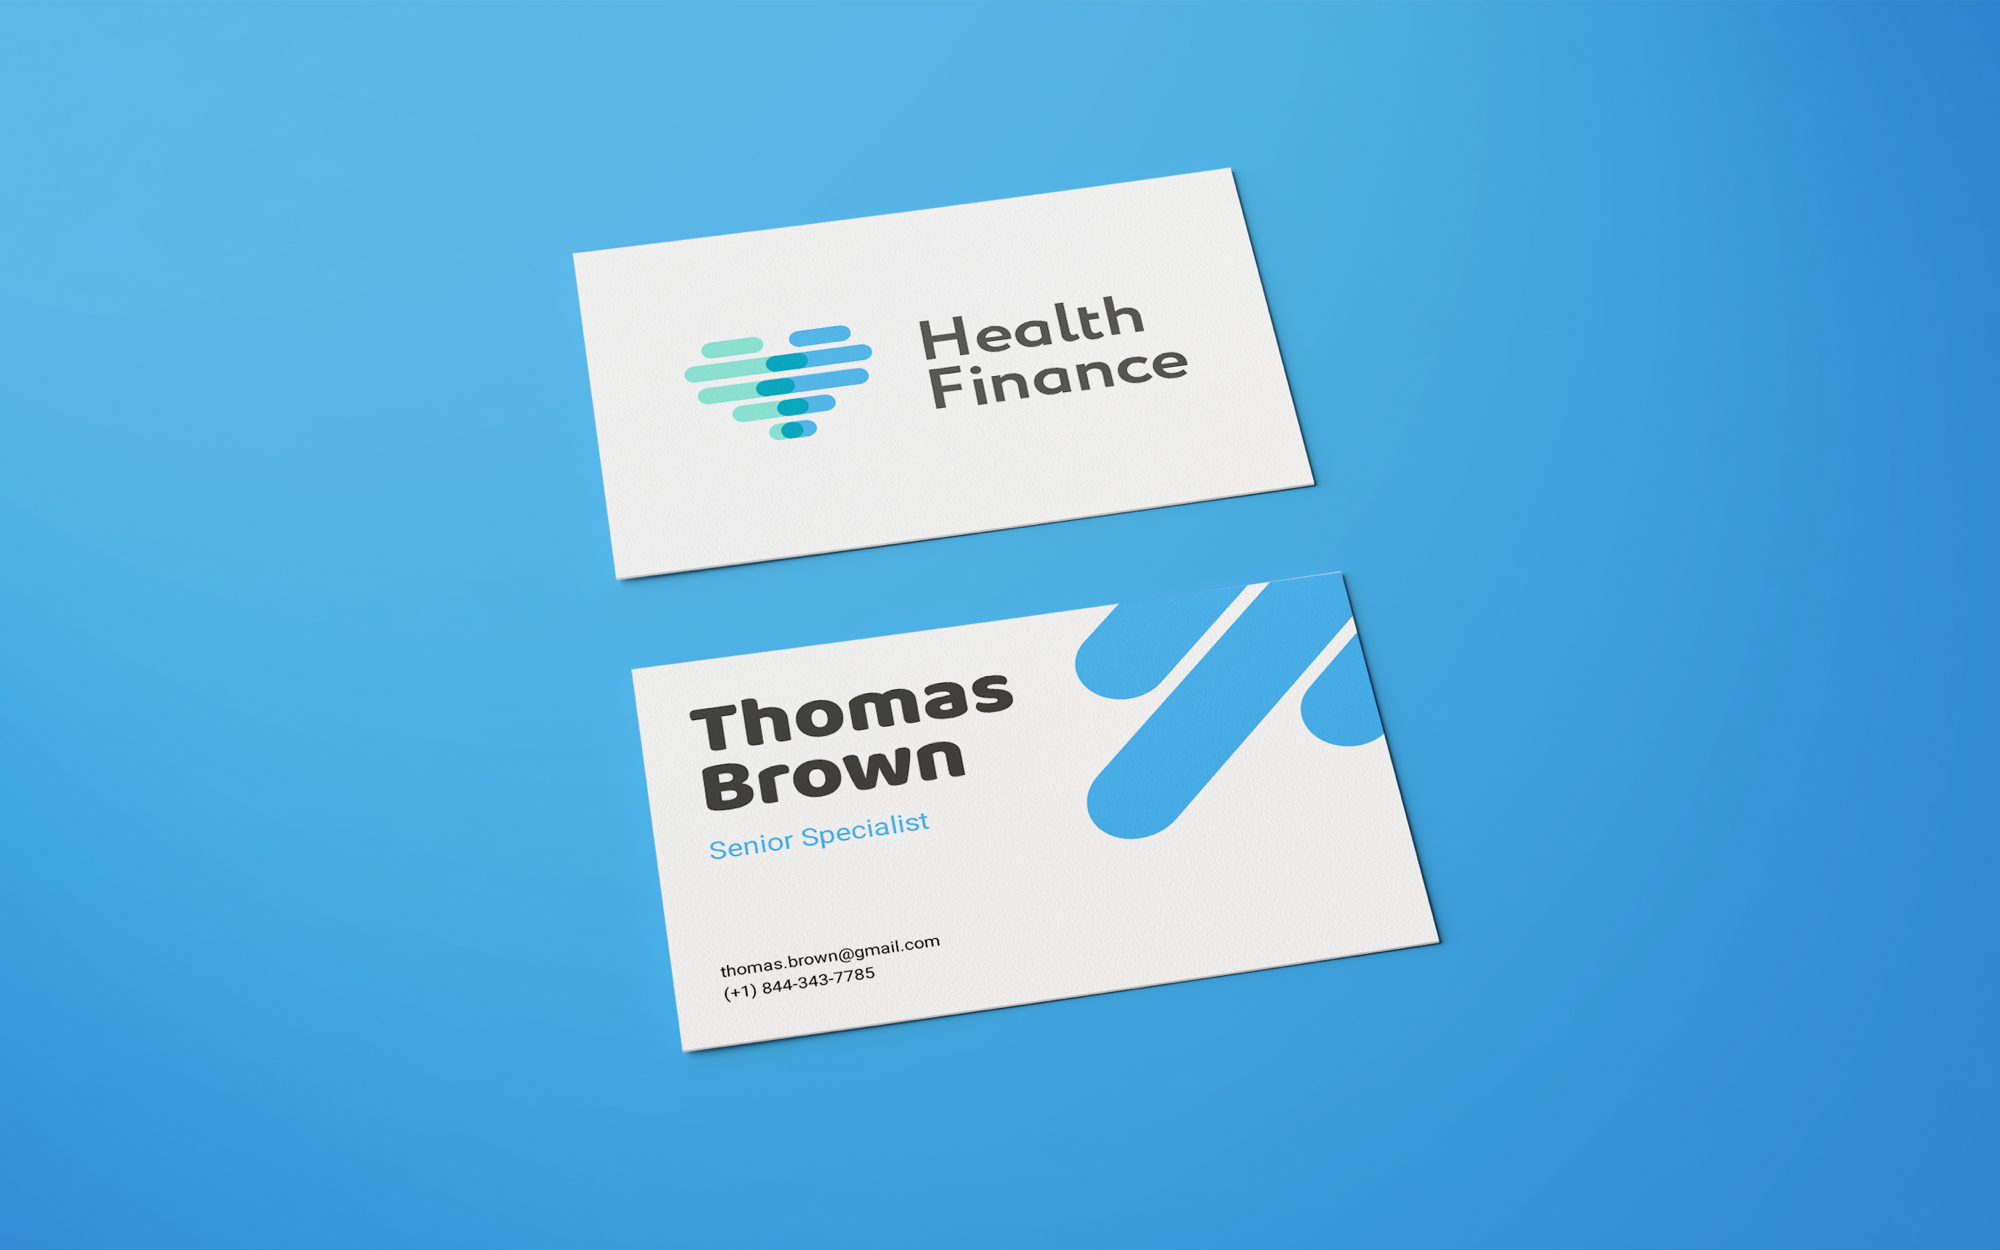 Business cards for health finance fintech startup samples.